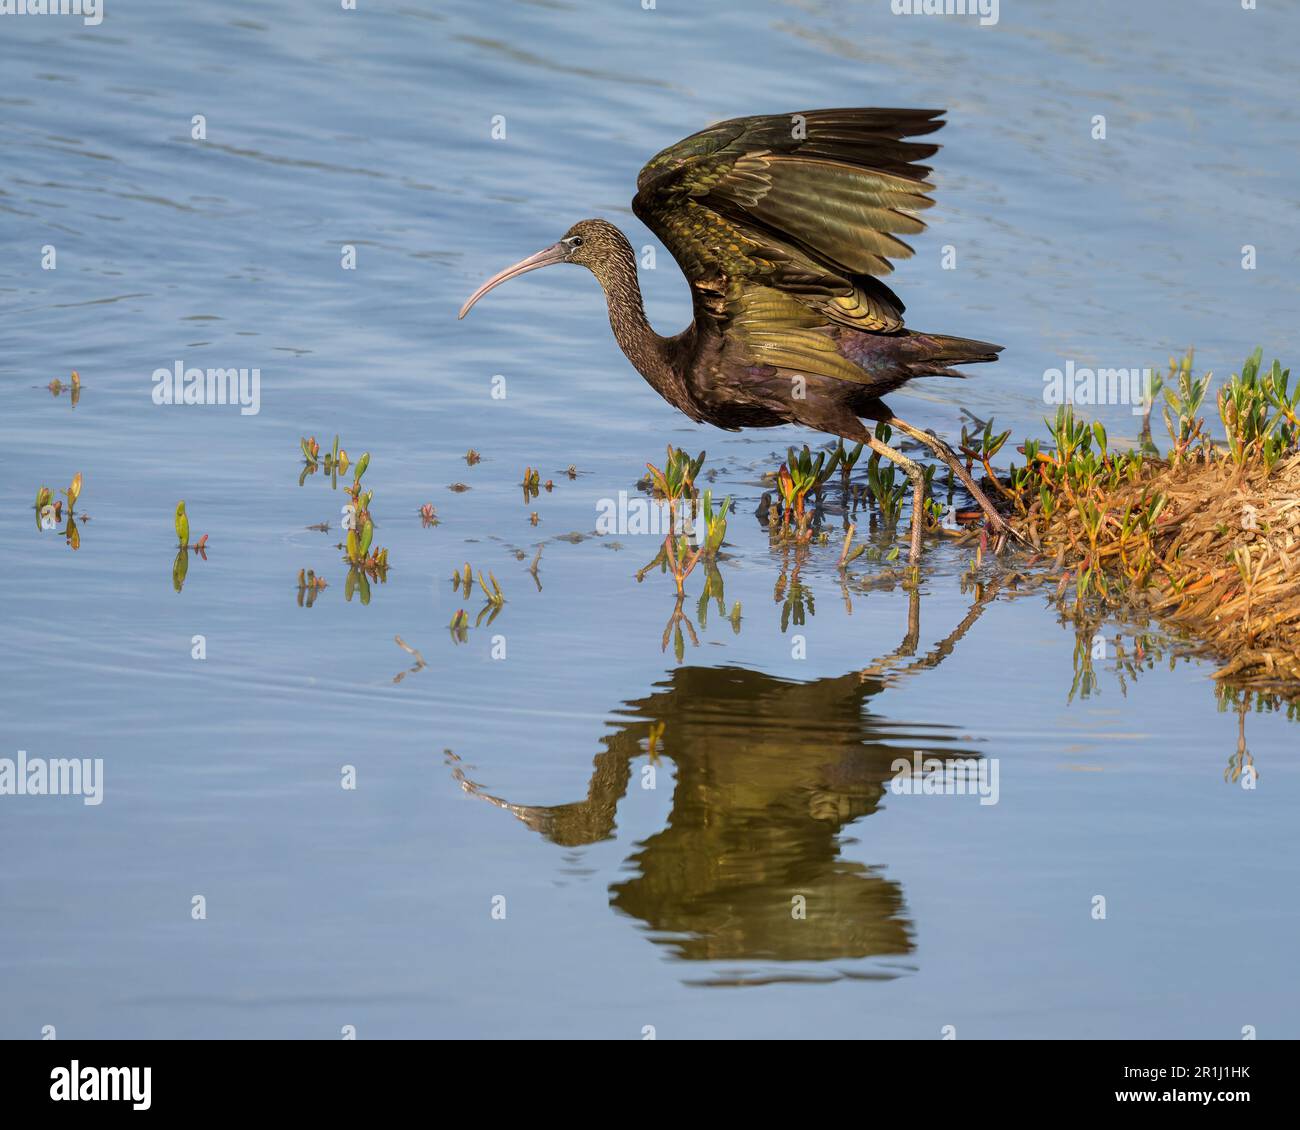 A glossy ibis, Plegadis falcinellus, a water bird wading through calm waters and starts flying, mirror imaging, Gran Canaria, Spain Stock Photo